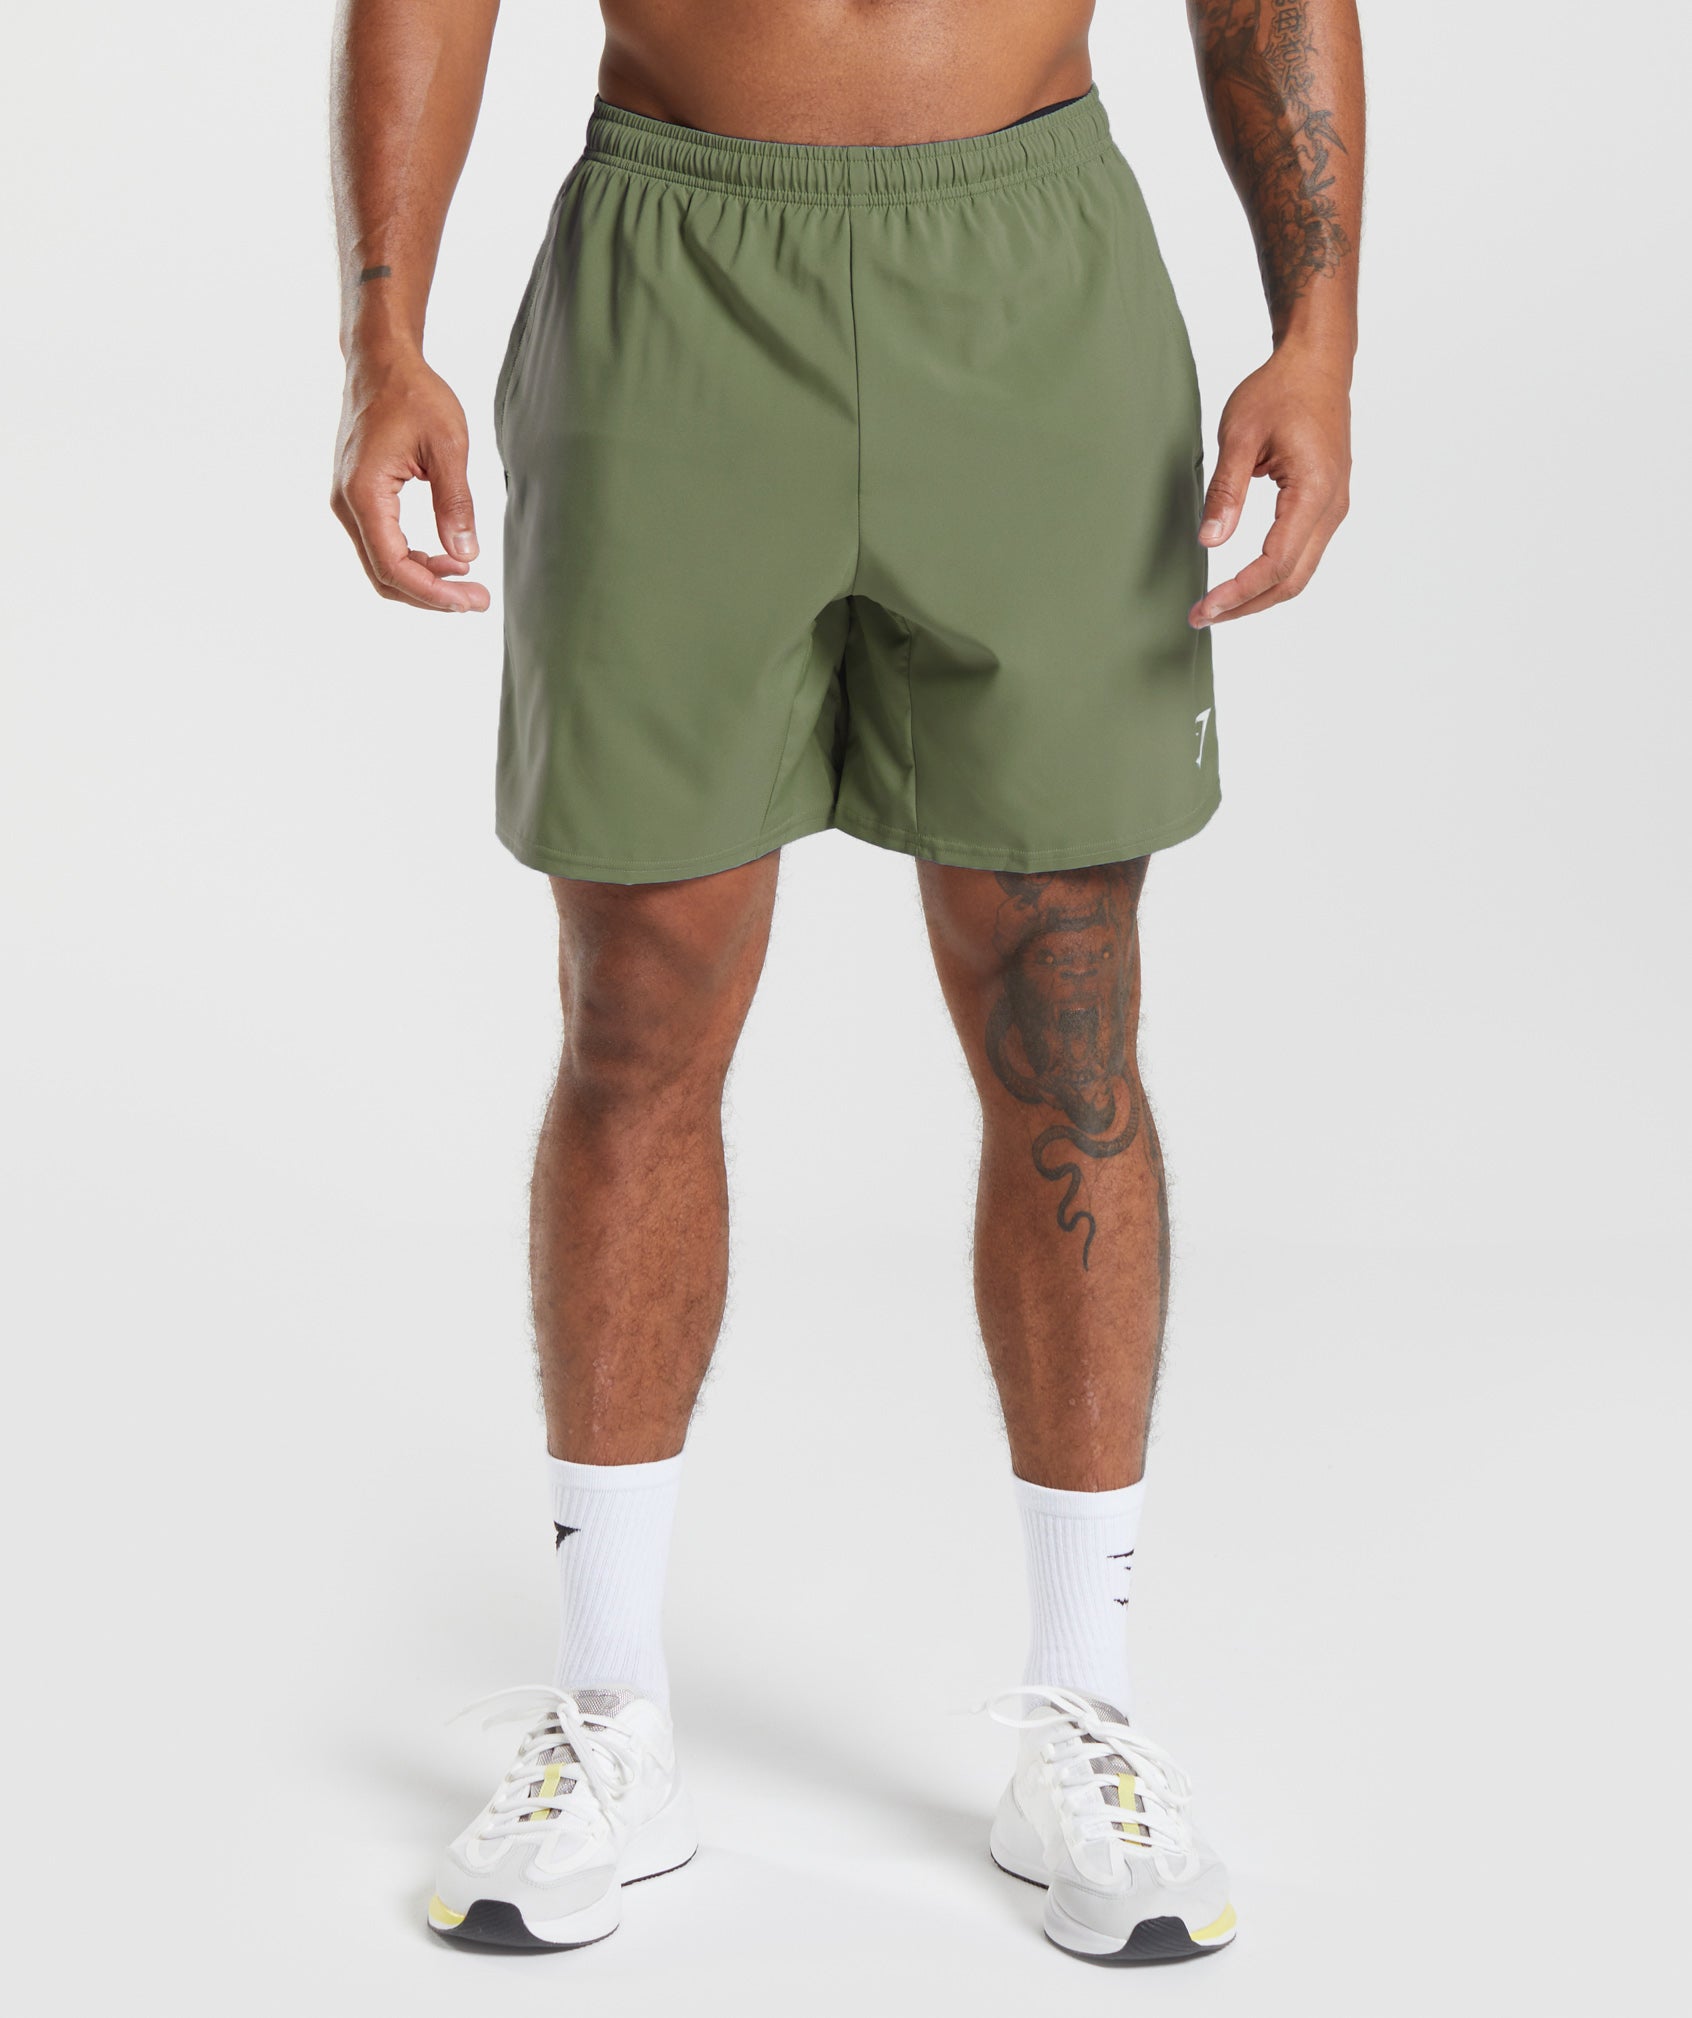 Arrival 7" Shorts in {{variantColor} is out of stock